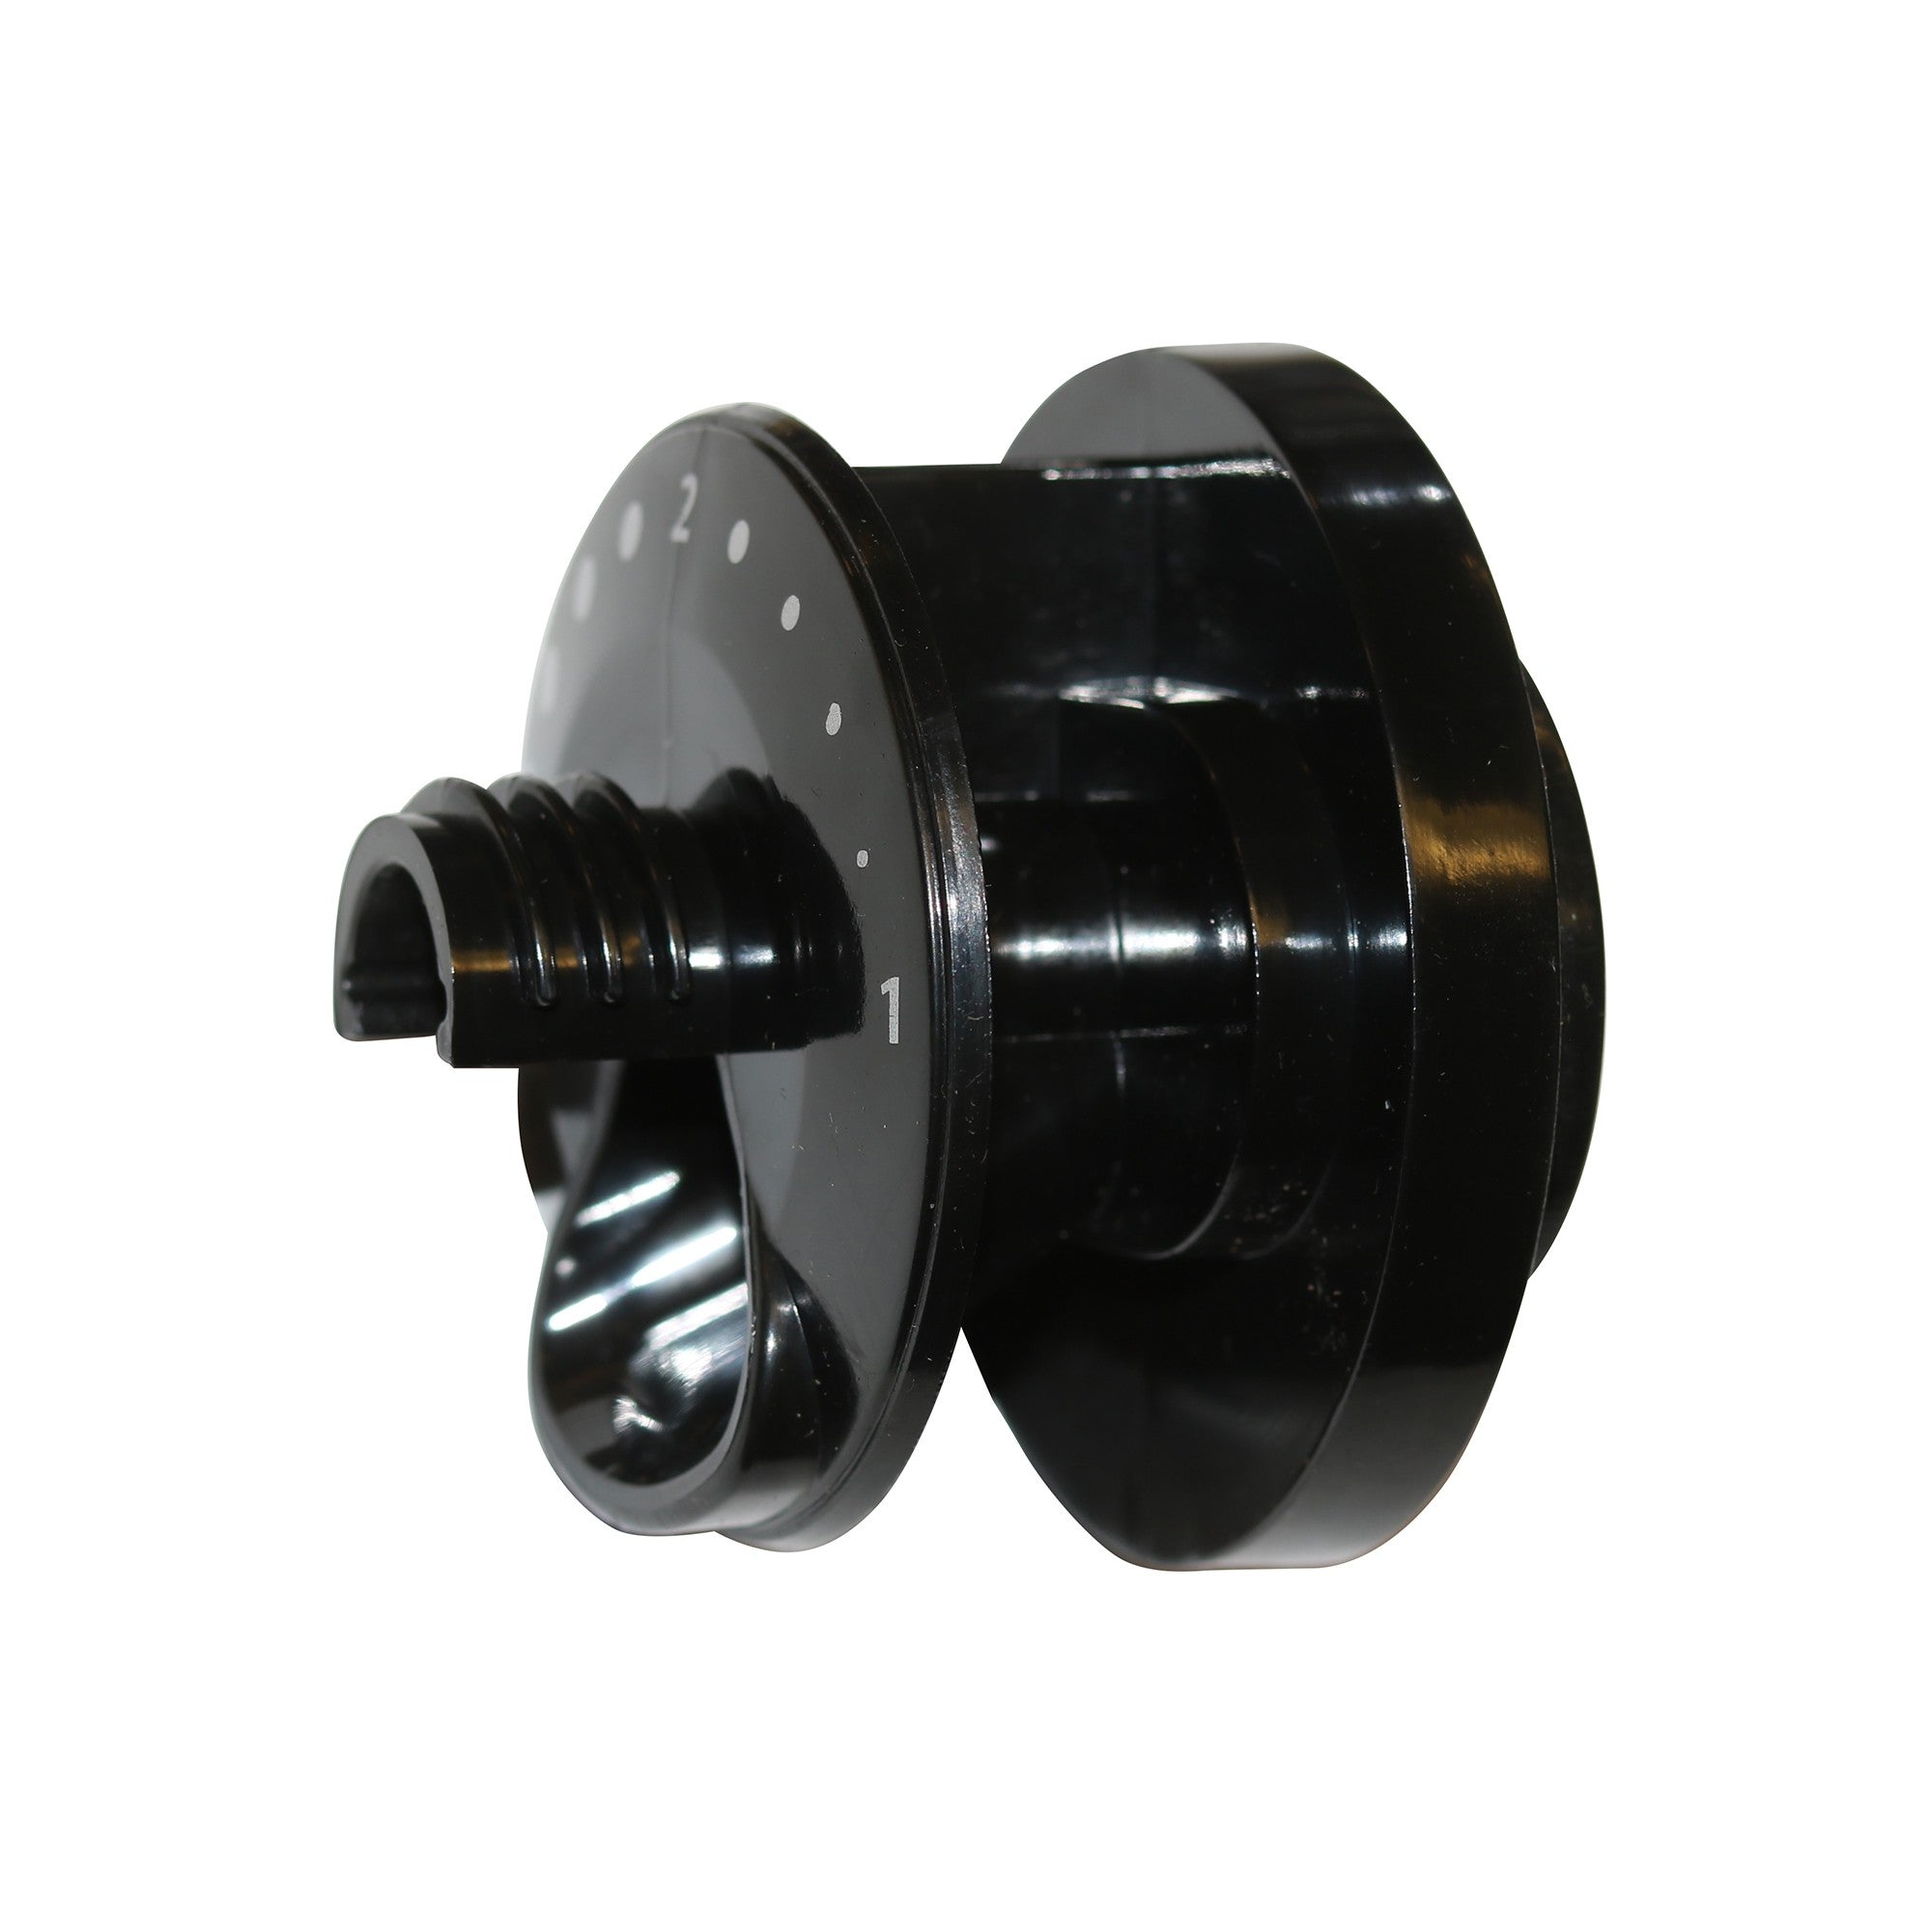 Drum Cap Assembly With Pressure Cap (TWN30)